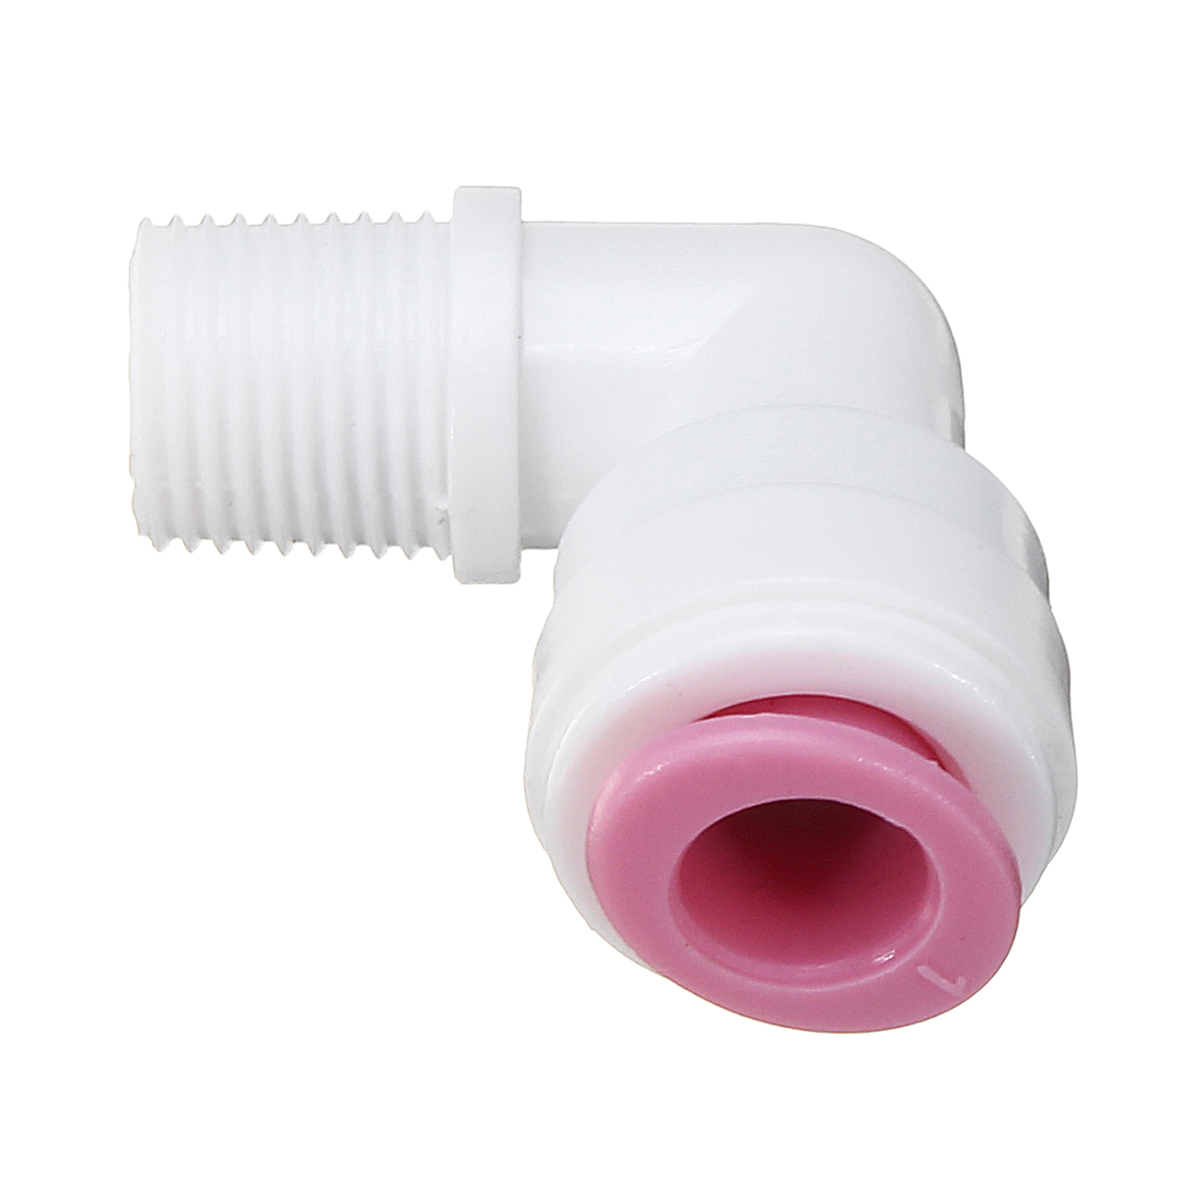 14-18-Inch-RO-Grade-Water-Pipes-Fittings-Quick-Connect-Push-In-to-Connect-Water-Pipe-1378099-5